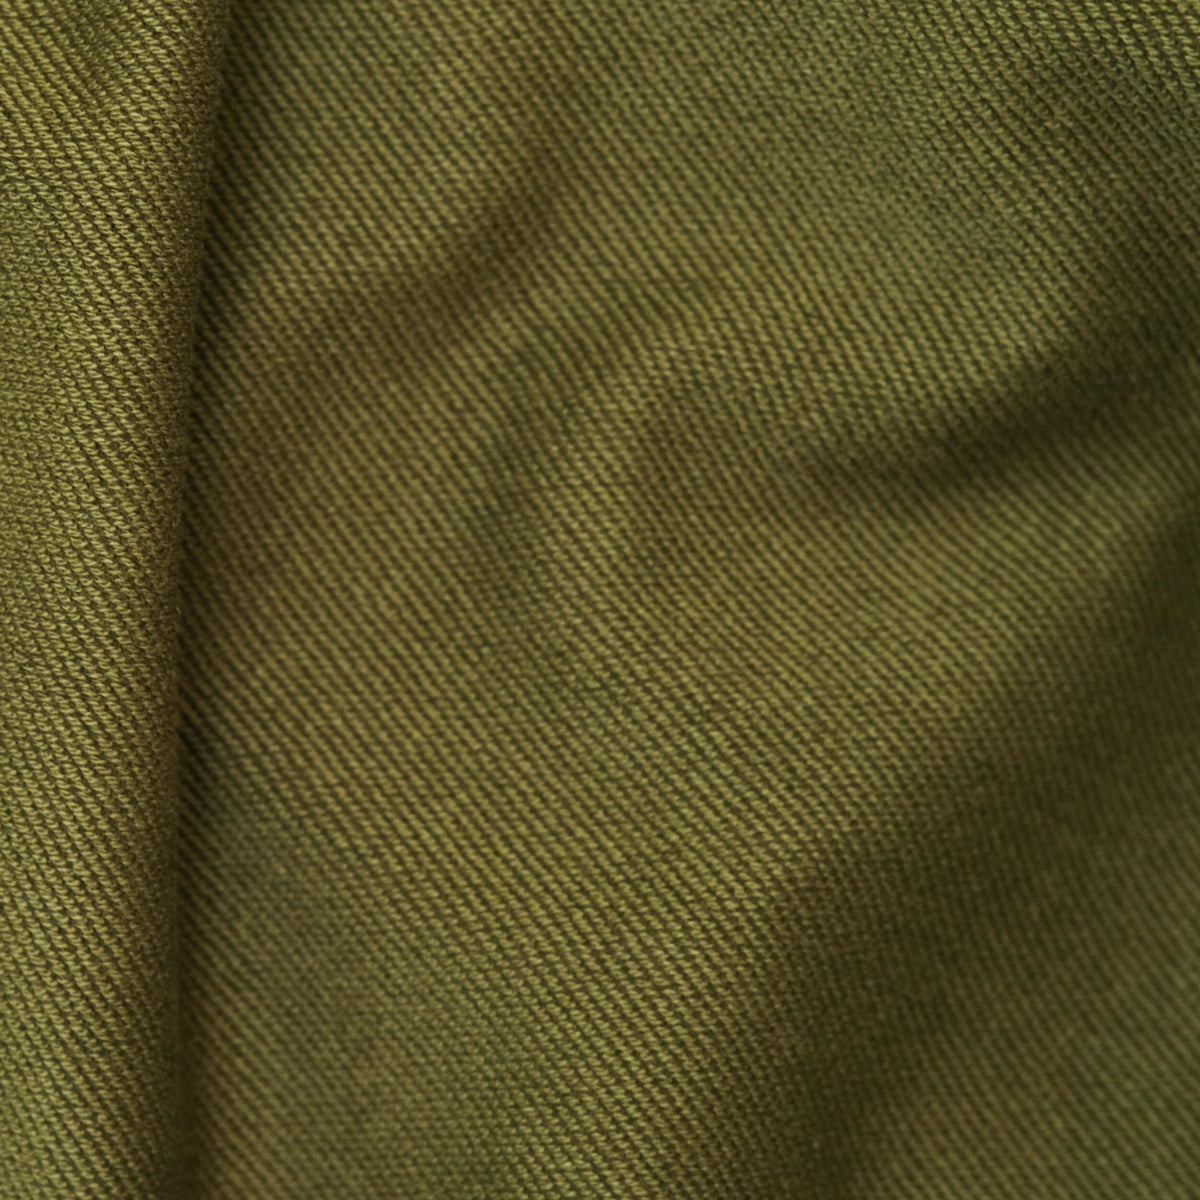 380 GSM Terry fabric in Olive used to make the 4YE Raw Hem Crew